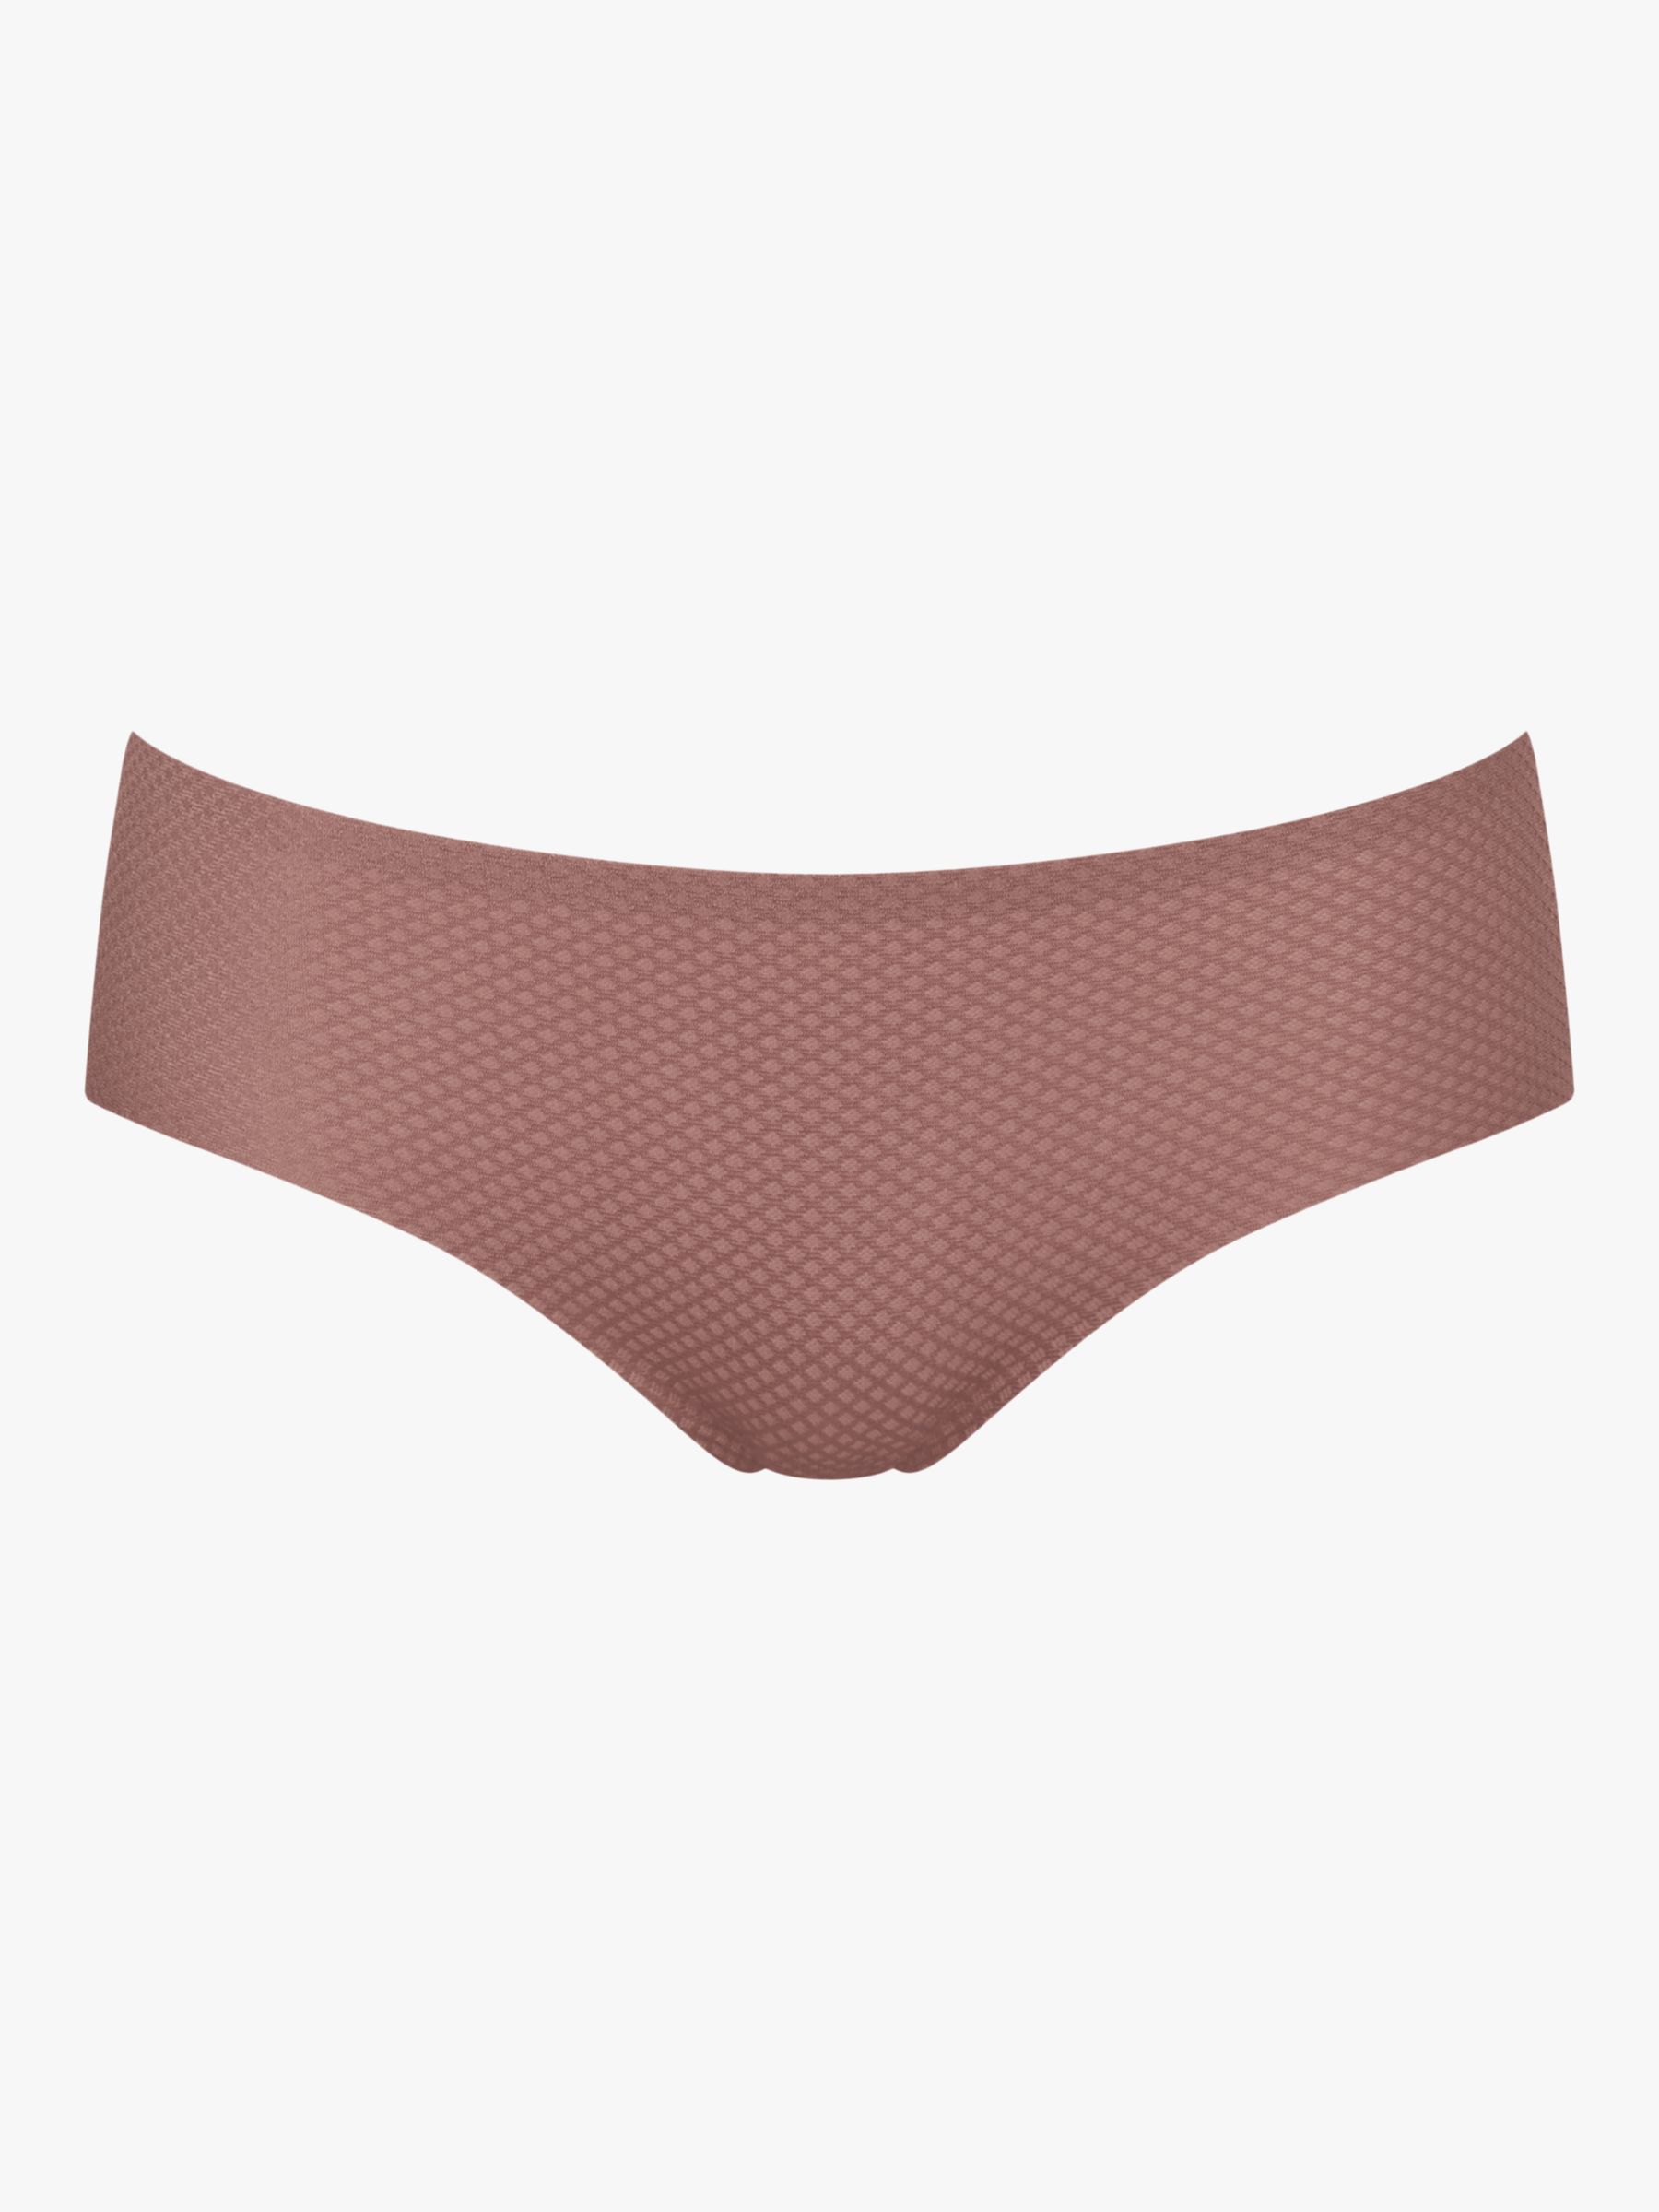 sloggi Zero Feel Flow Hipster Knickers, Cacao, L